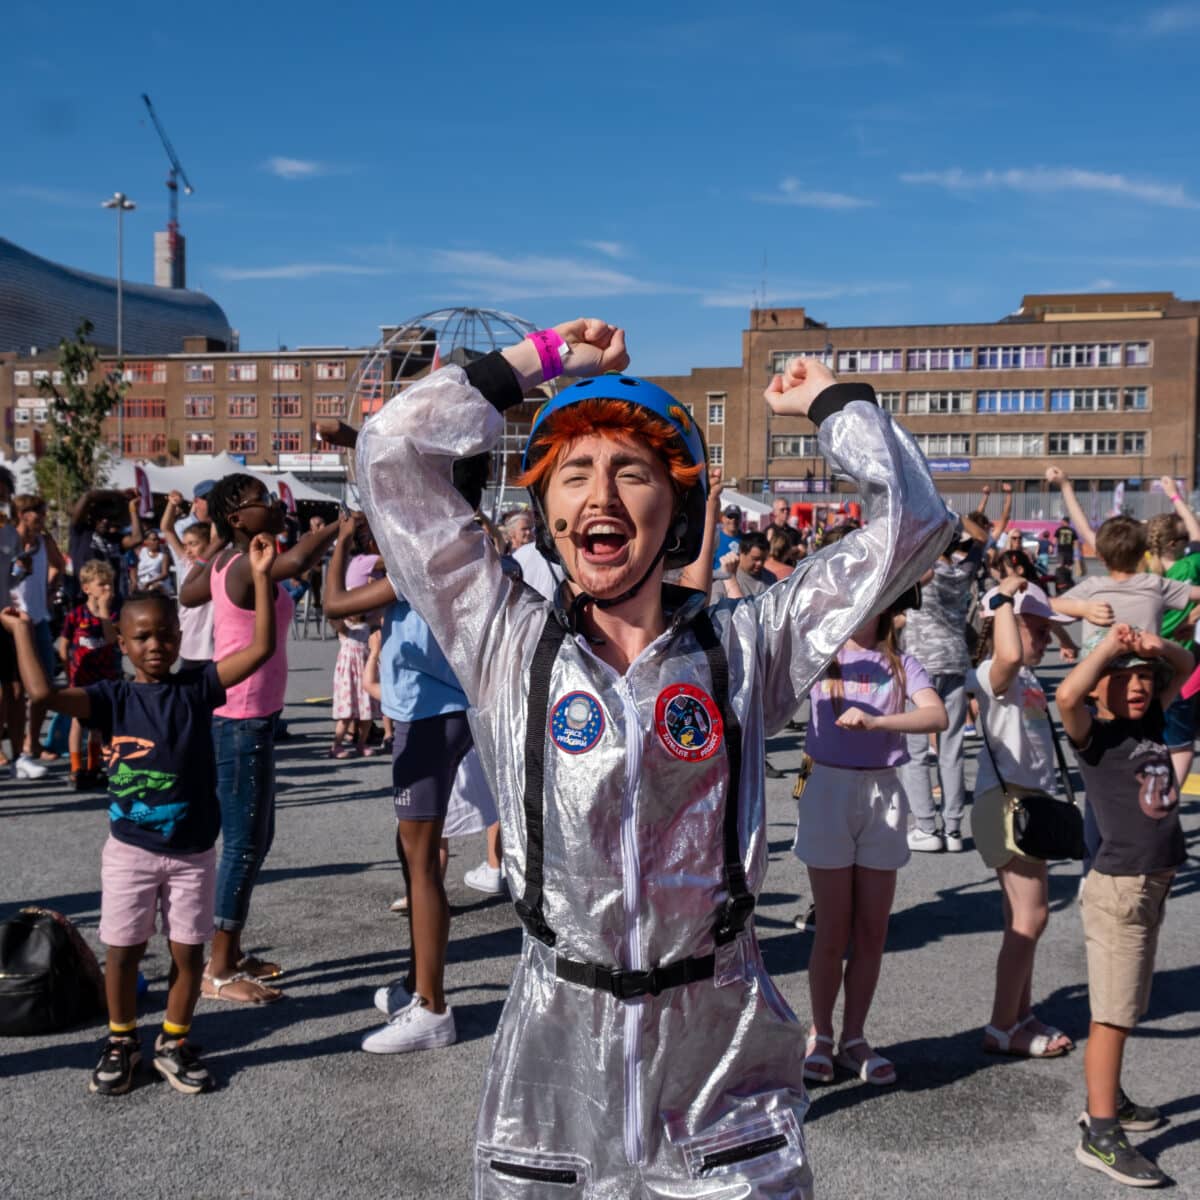 A performer dressed in an astronaut costume dances in the middle of a crowd.